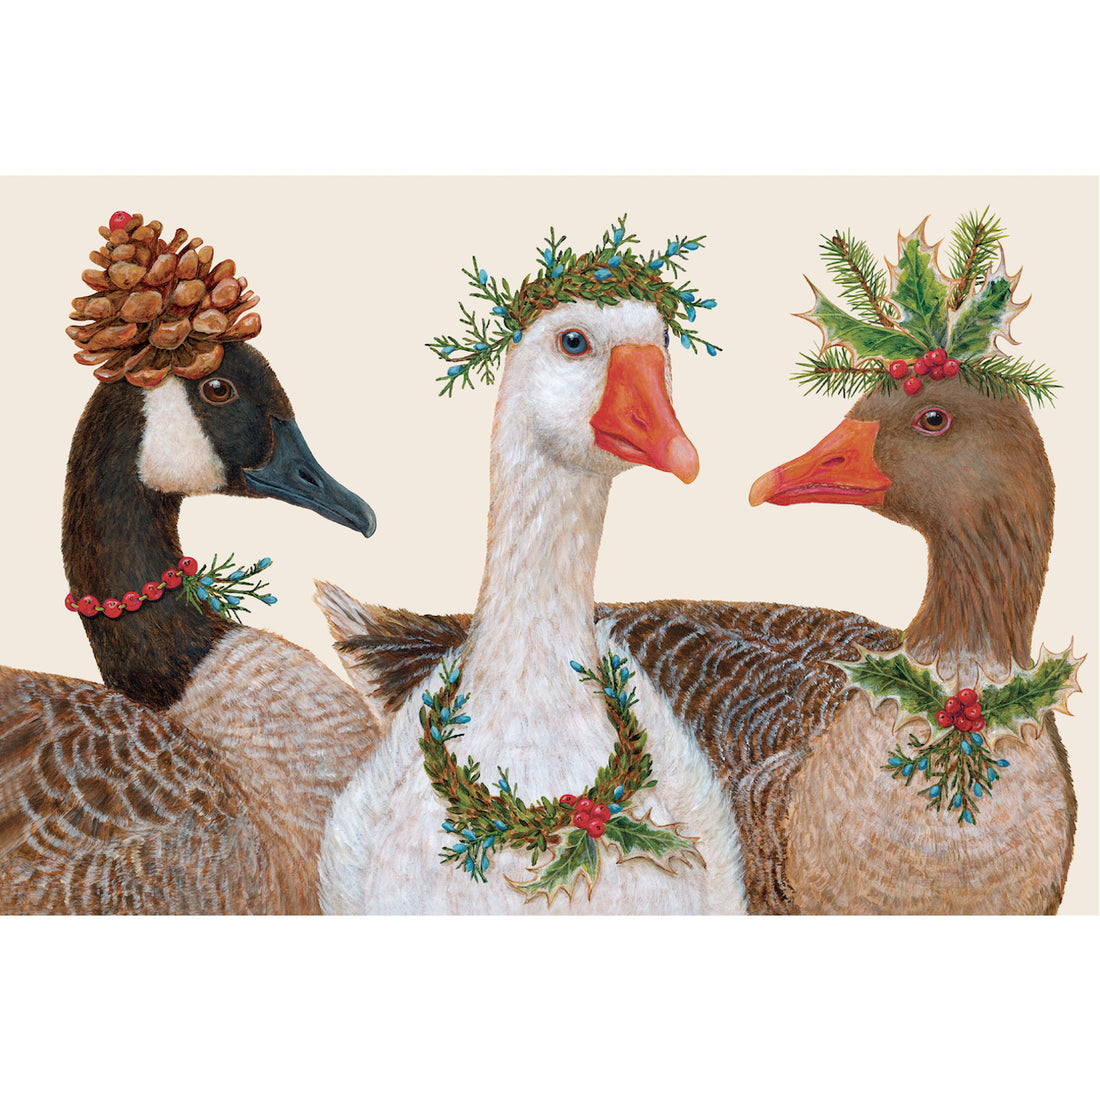 The illustrated faces of three different kinds of geese, each with their heads and necks adorned with winter botanicals, on a cream background.